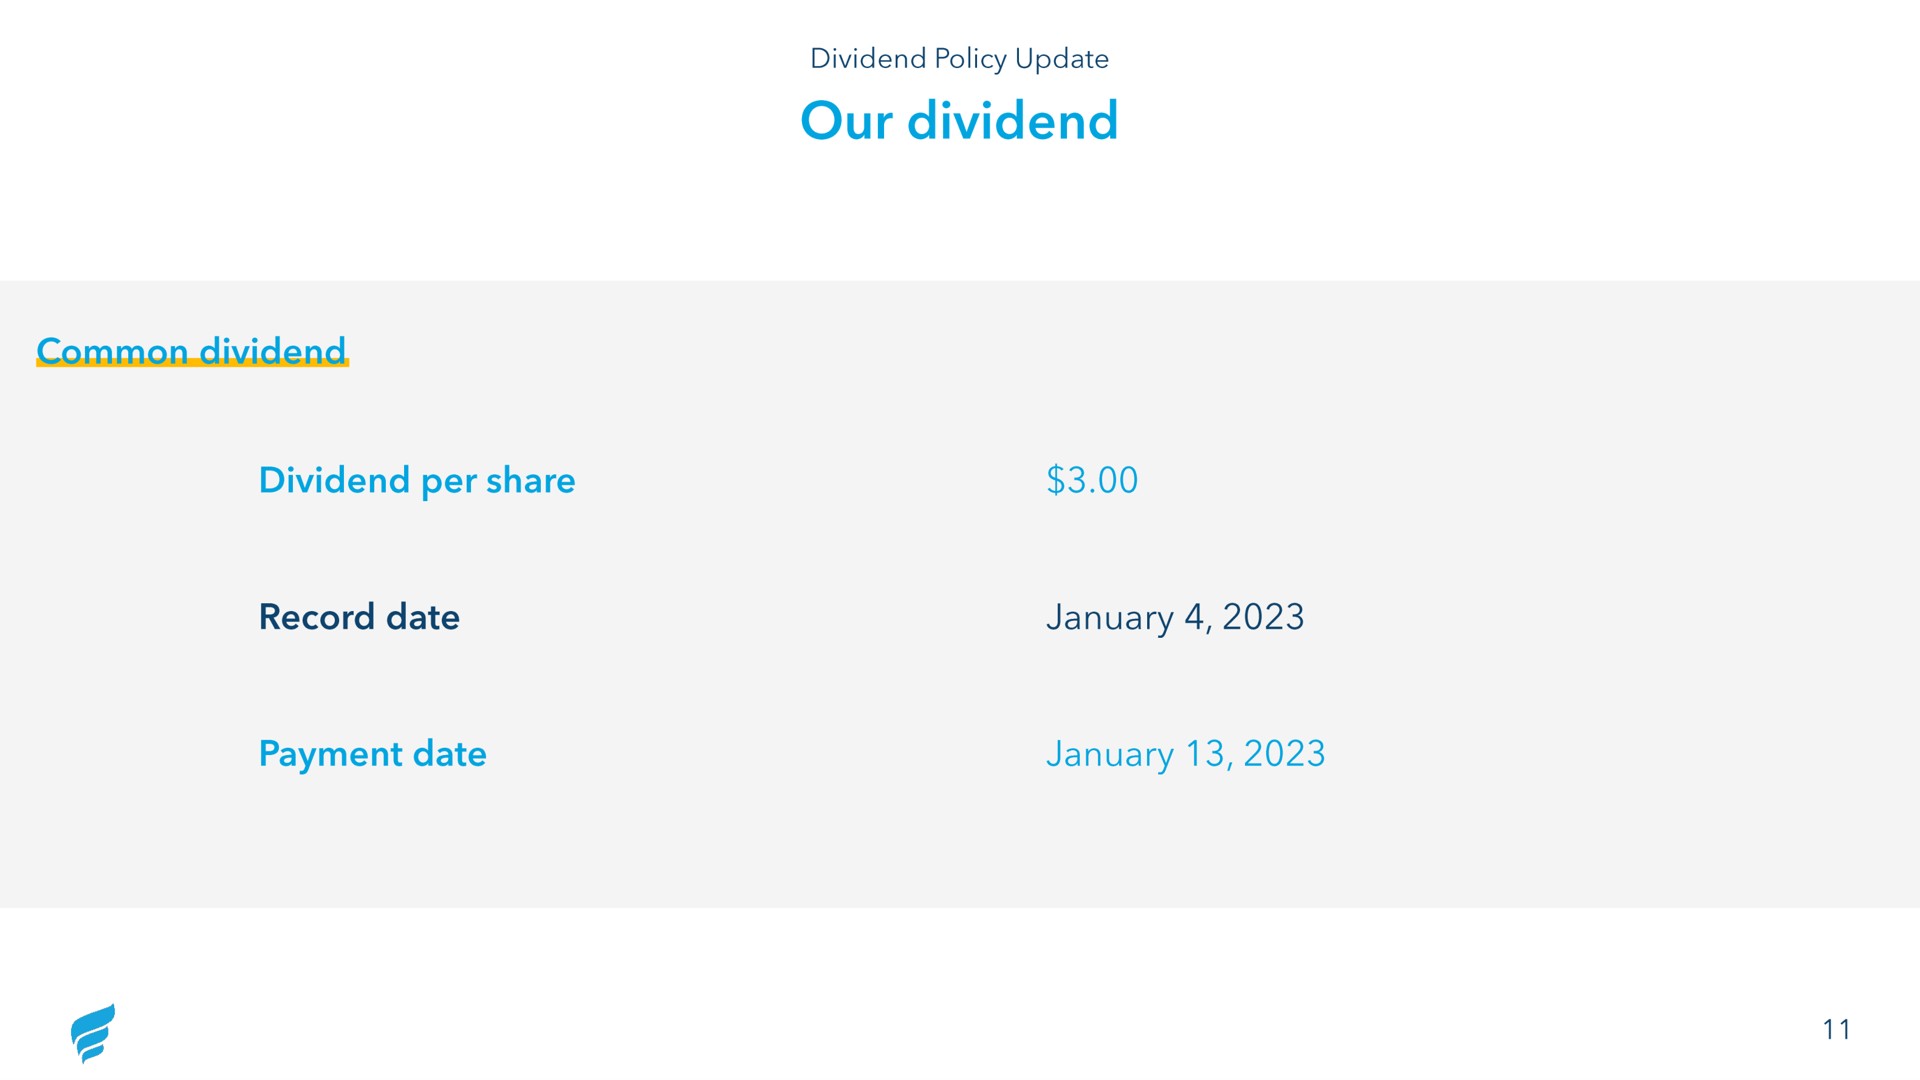 our dividend common dividend dividend per share record date payment date | NewFortress Energy